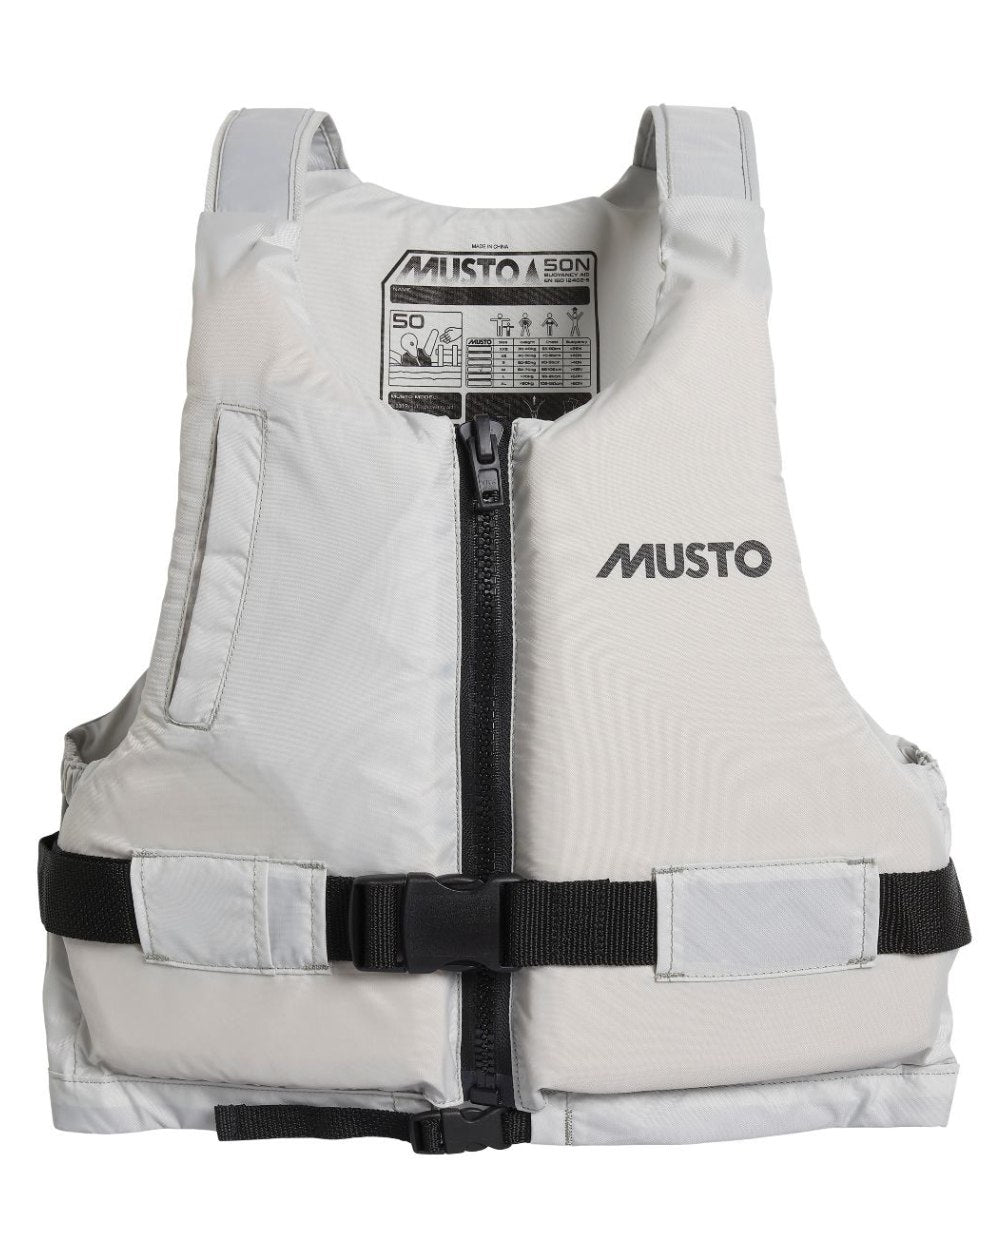 Platinum Coloured Musto Buoyancy Aid On A White Background 